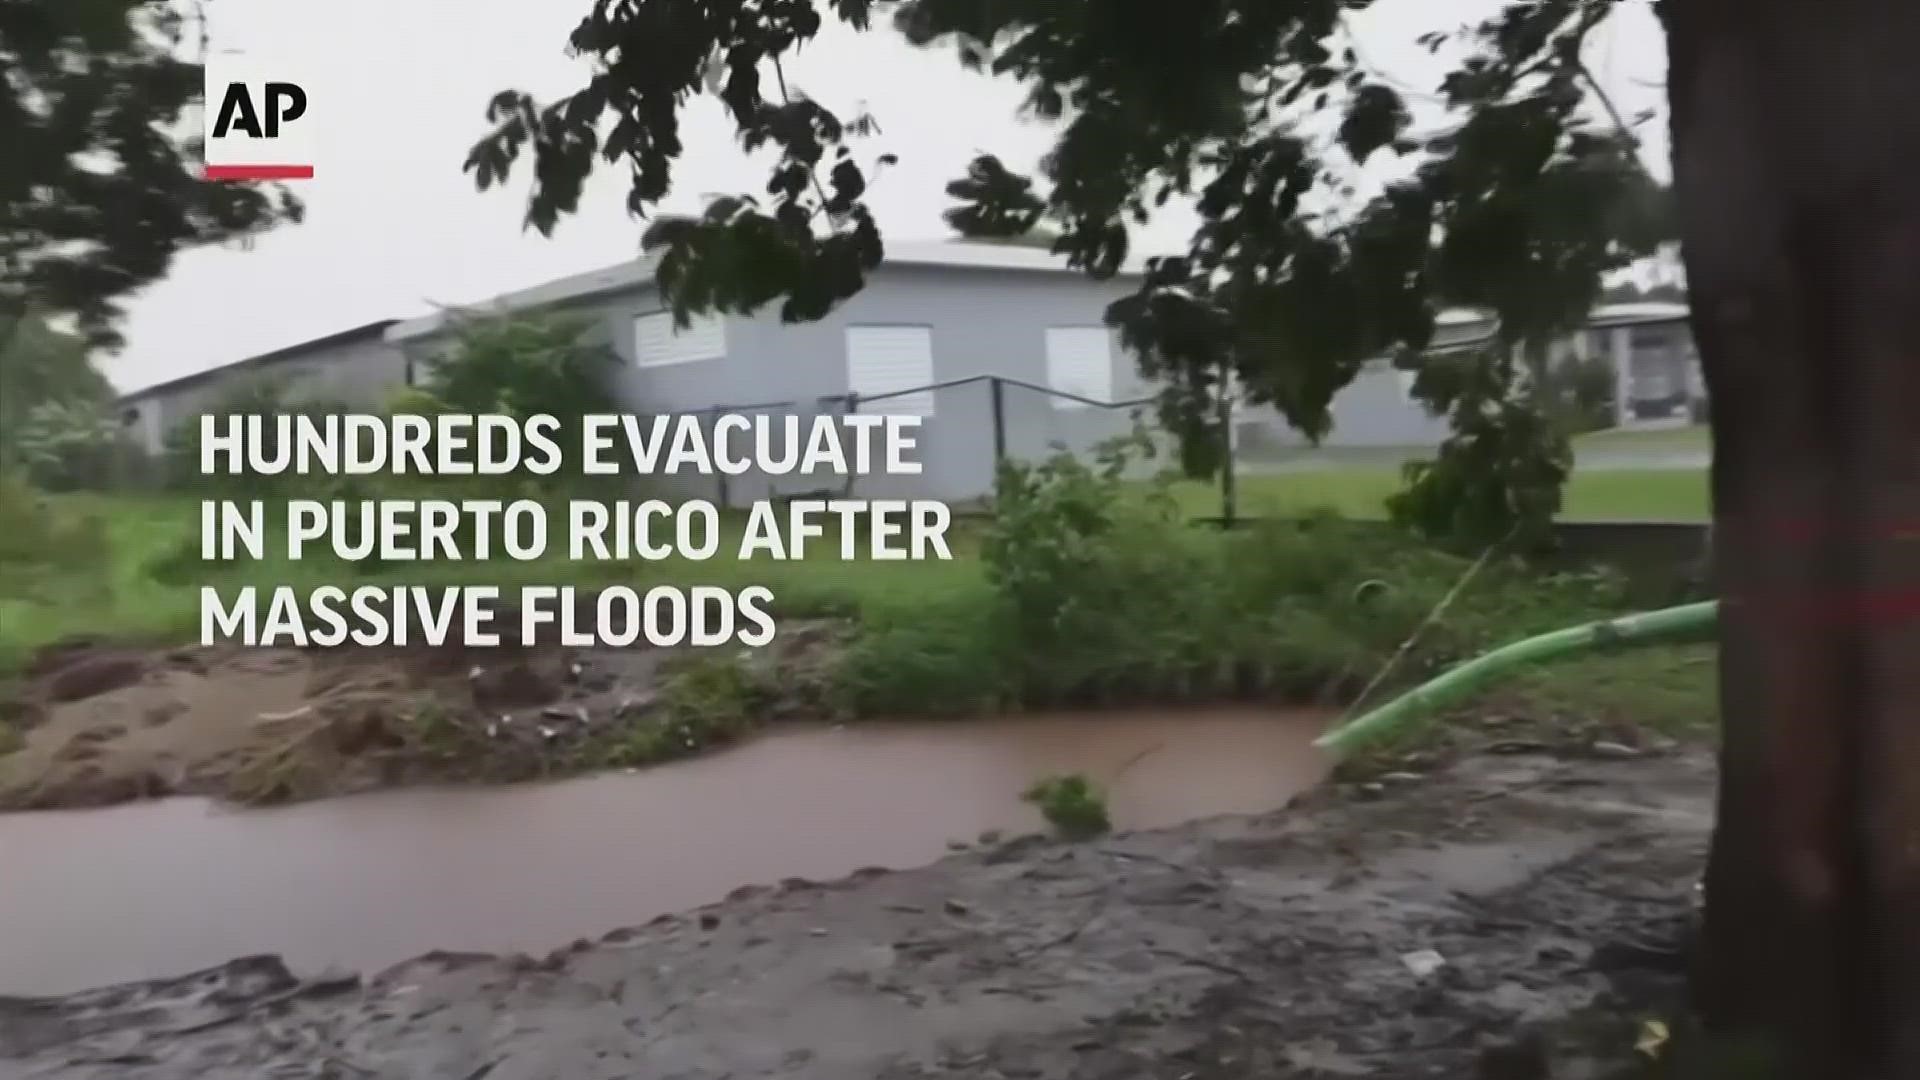 City workers in the town of Loiza on the northeastern coast of Puerto Rico went house to house on Sunday asking people to evacuate ahead of expected floods.